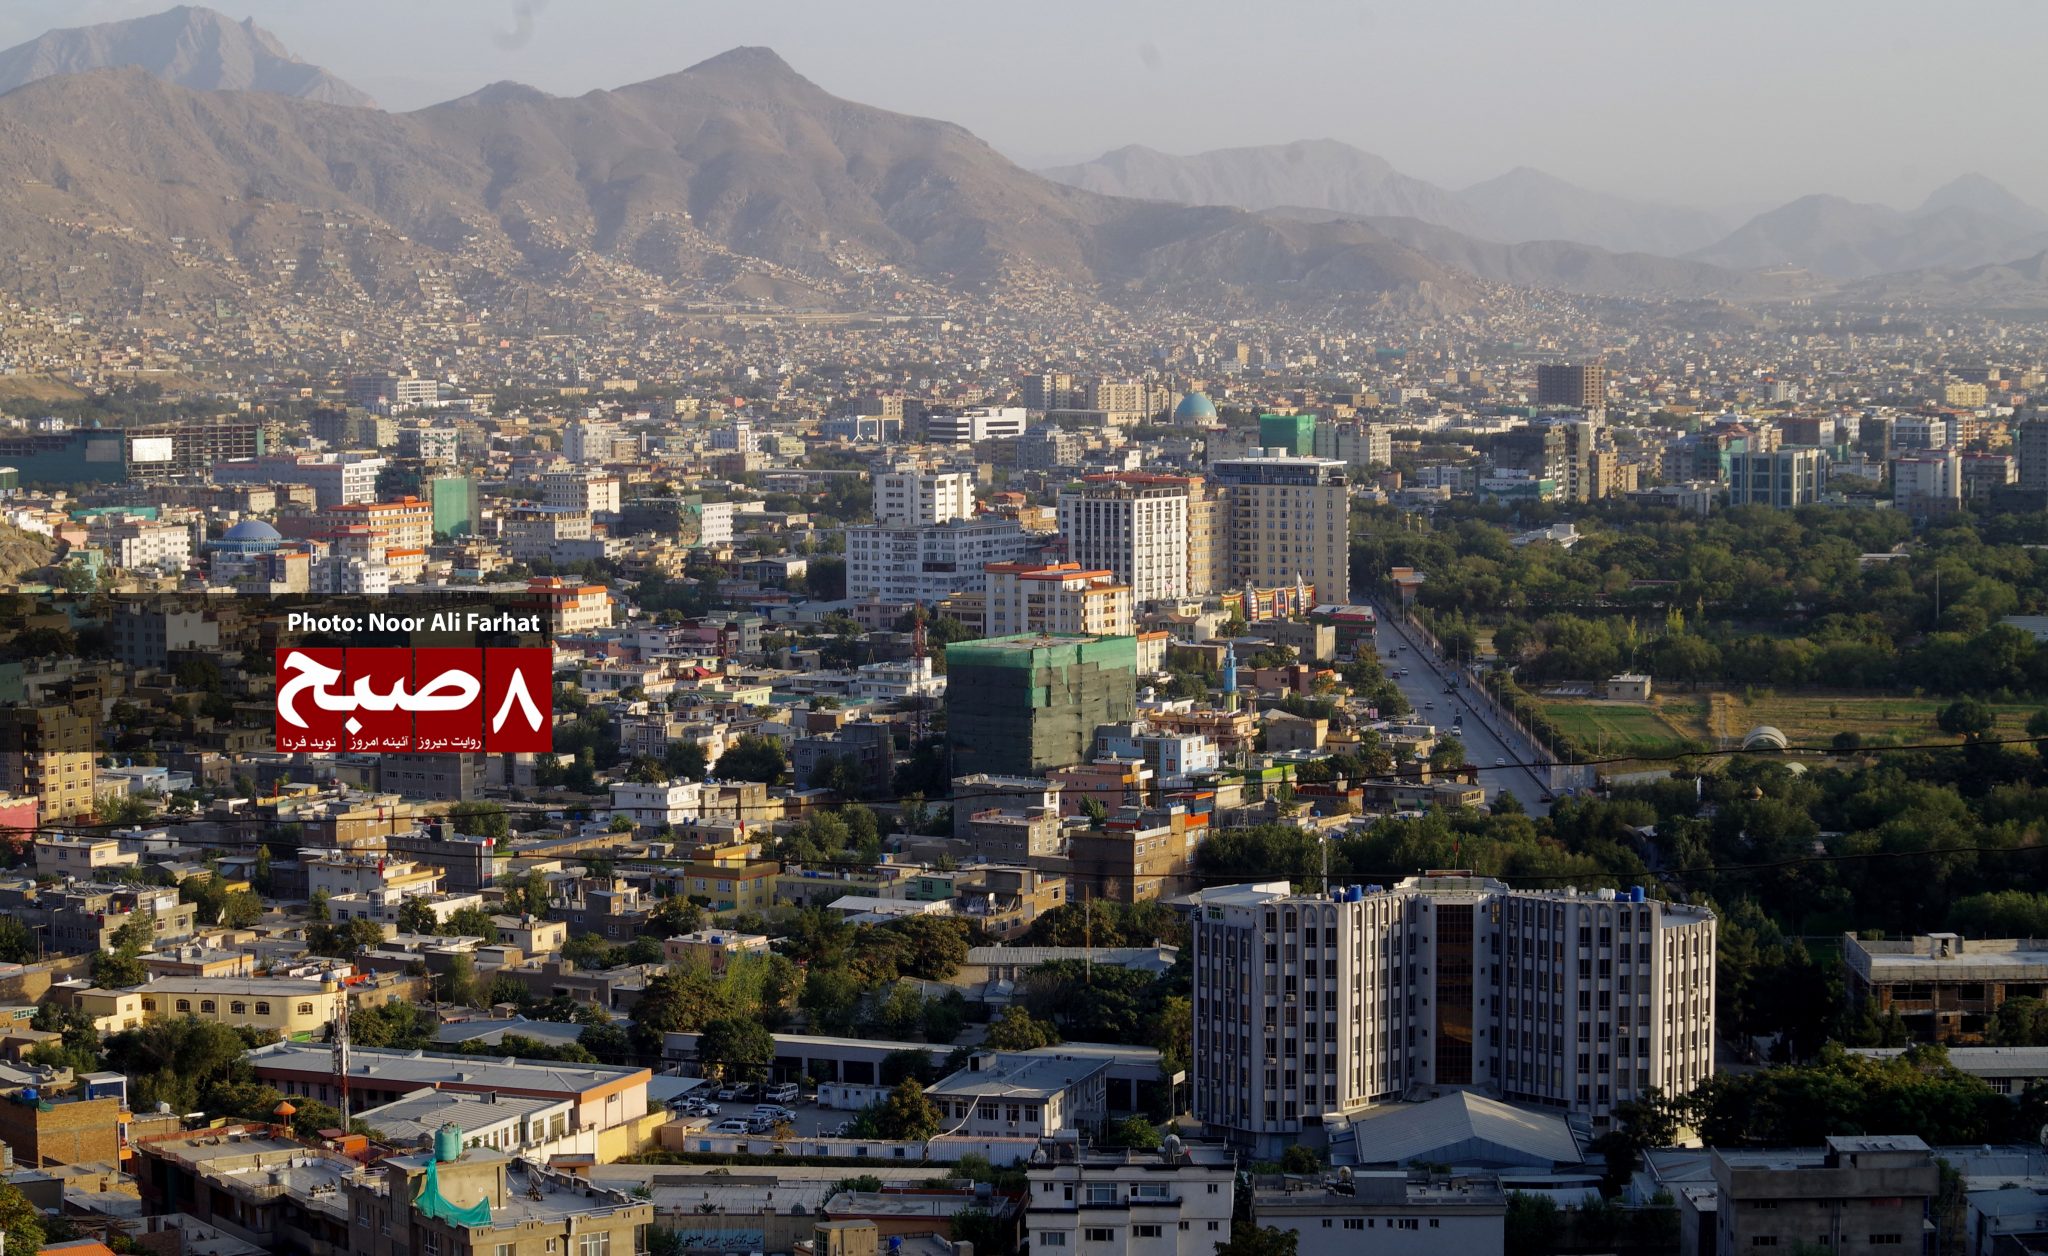 two-girls-arrested-for-extorting-money-from-men-in-kabul